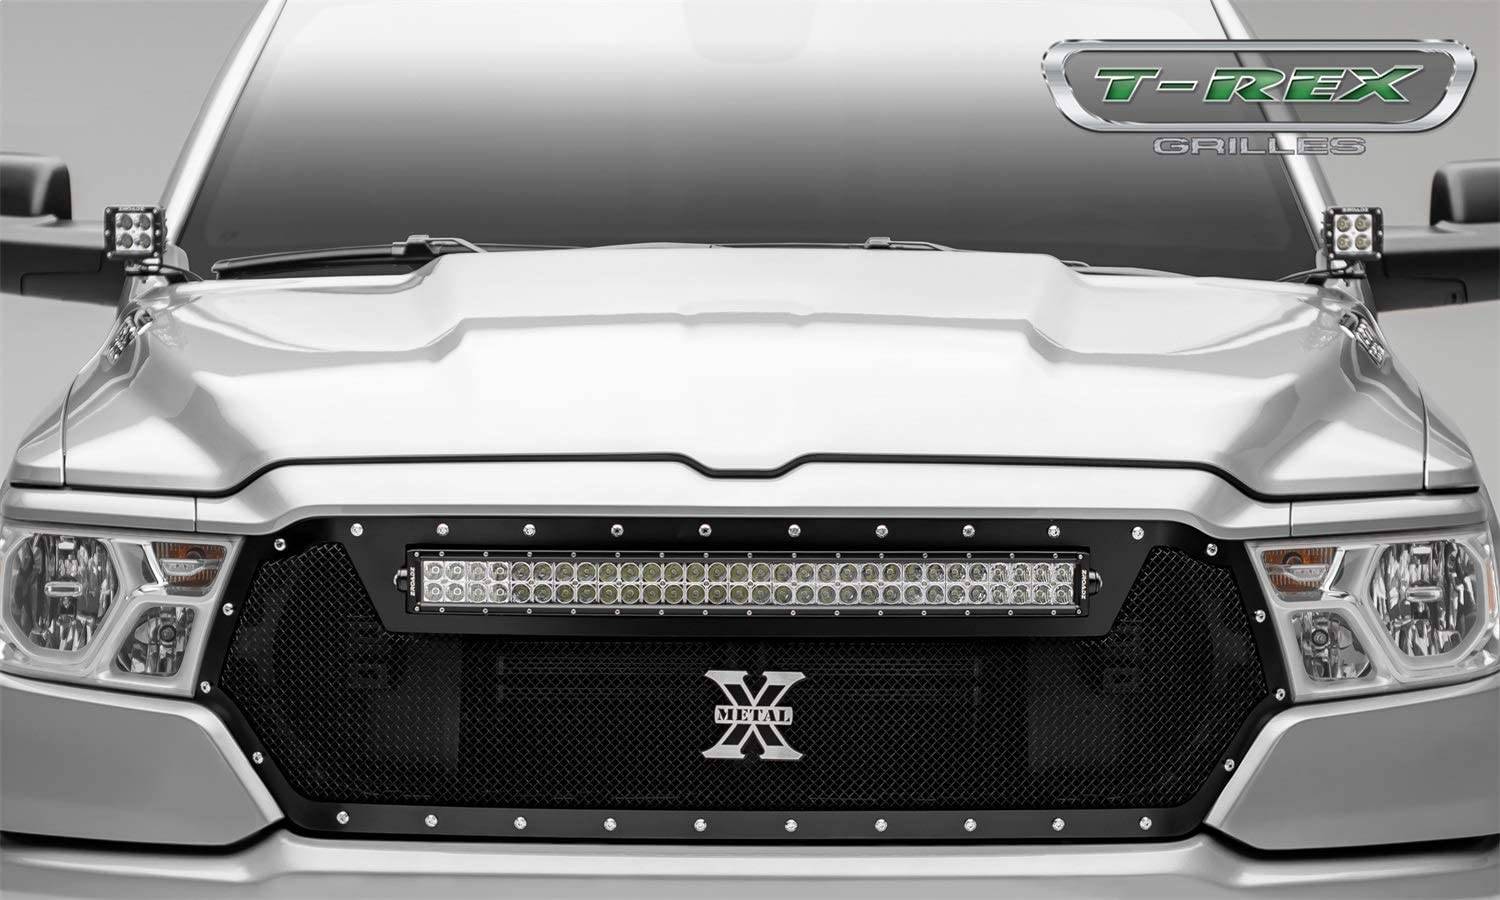 T-REX Grilles - 2019--2021 Ram 1500 Laramie, Lone Star, Big Horn, Tradesman Torch Grille, Black, 1 Pc, Replacement, Chrome Studs, Incl. (1) 30" LED - PN #6314651